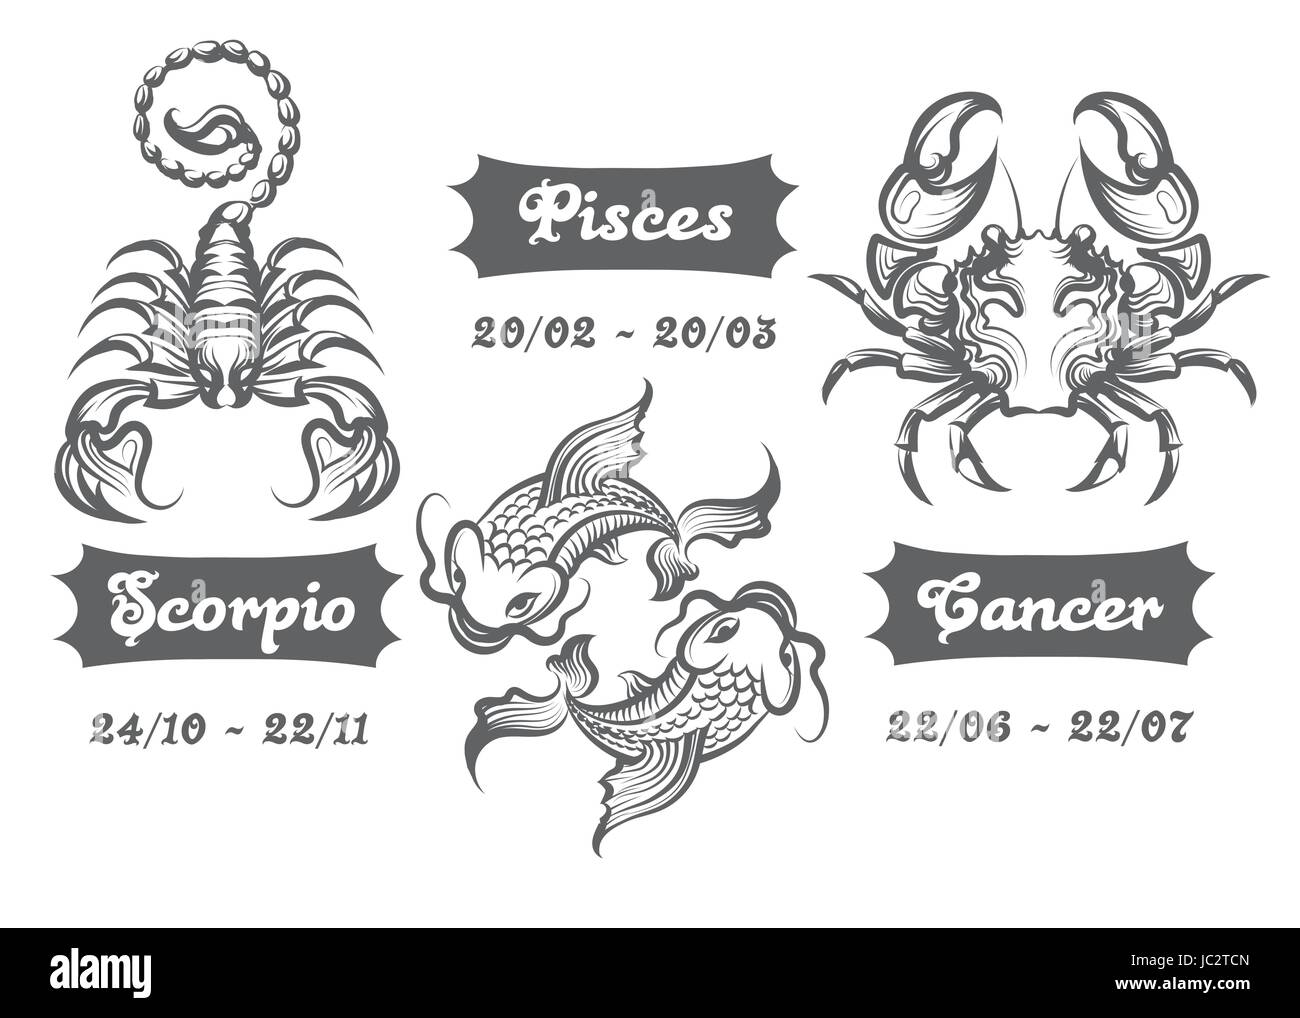 Set of Water Zodiac signs. Scorpion, Fishes and Cancer drawn in engraving style. Vector illustration. Stock Vector